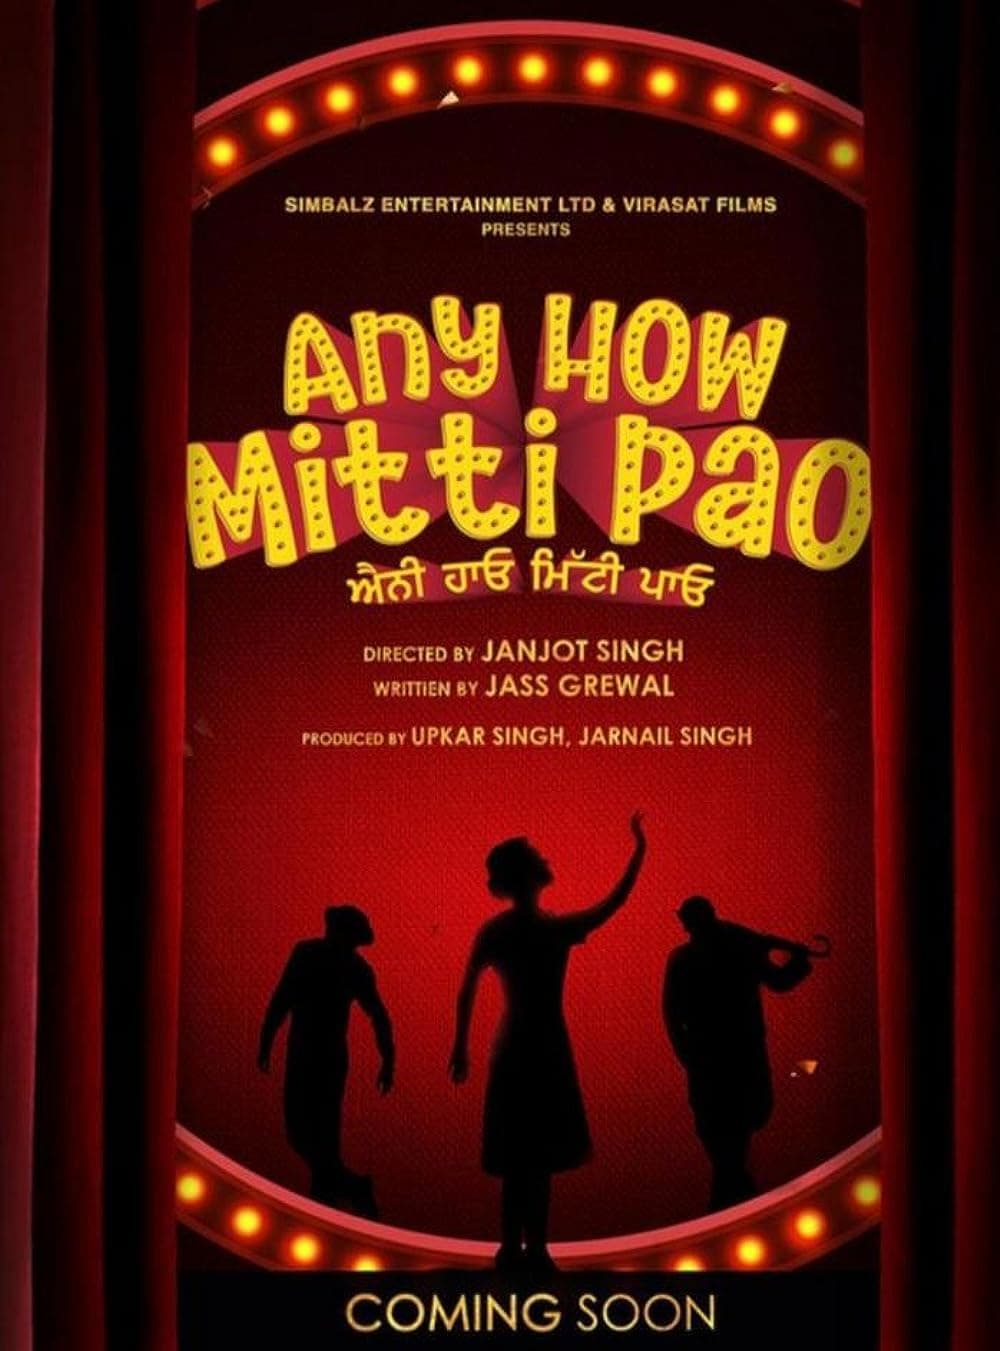 Any How Mitti Pao Movie Review | Any How Mitti Pao Filmy Rating 2023